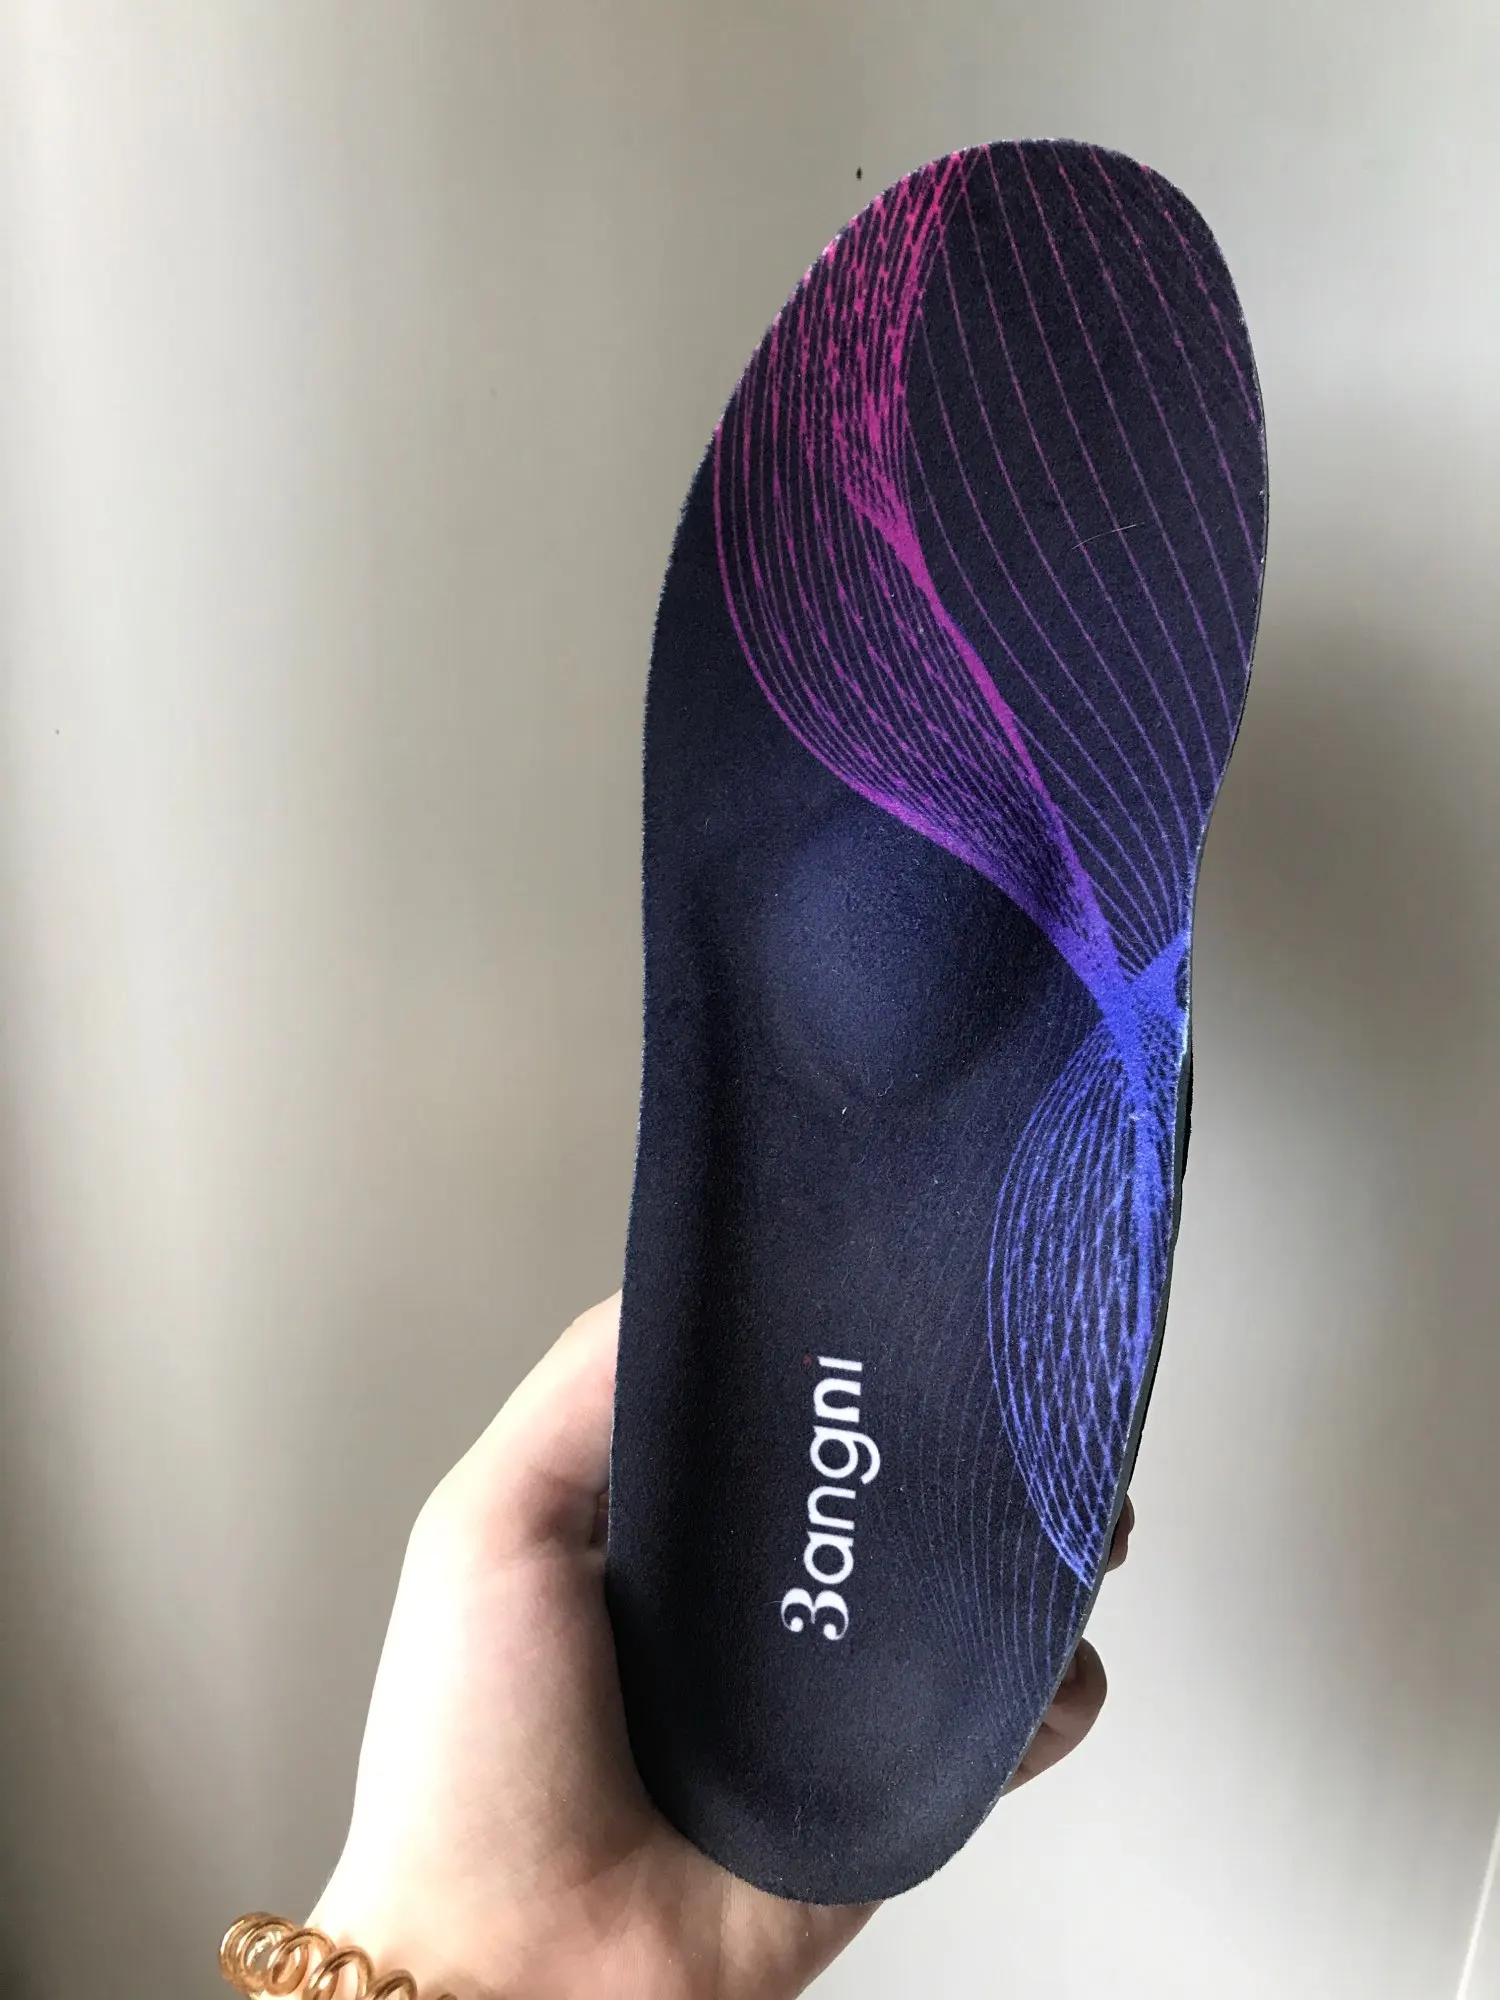 3ANGNI Orthopedic Insoles Arch Support For Flat Feet Women Men Heel Cushions Relief Plantar Fasciitis Insole Orthotic Shoes Sole